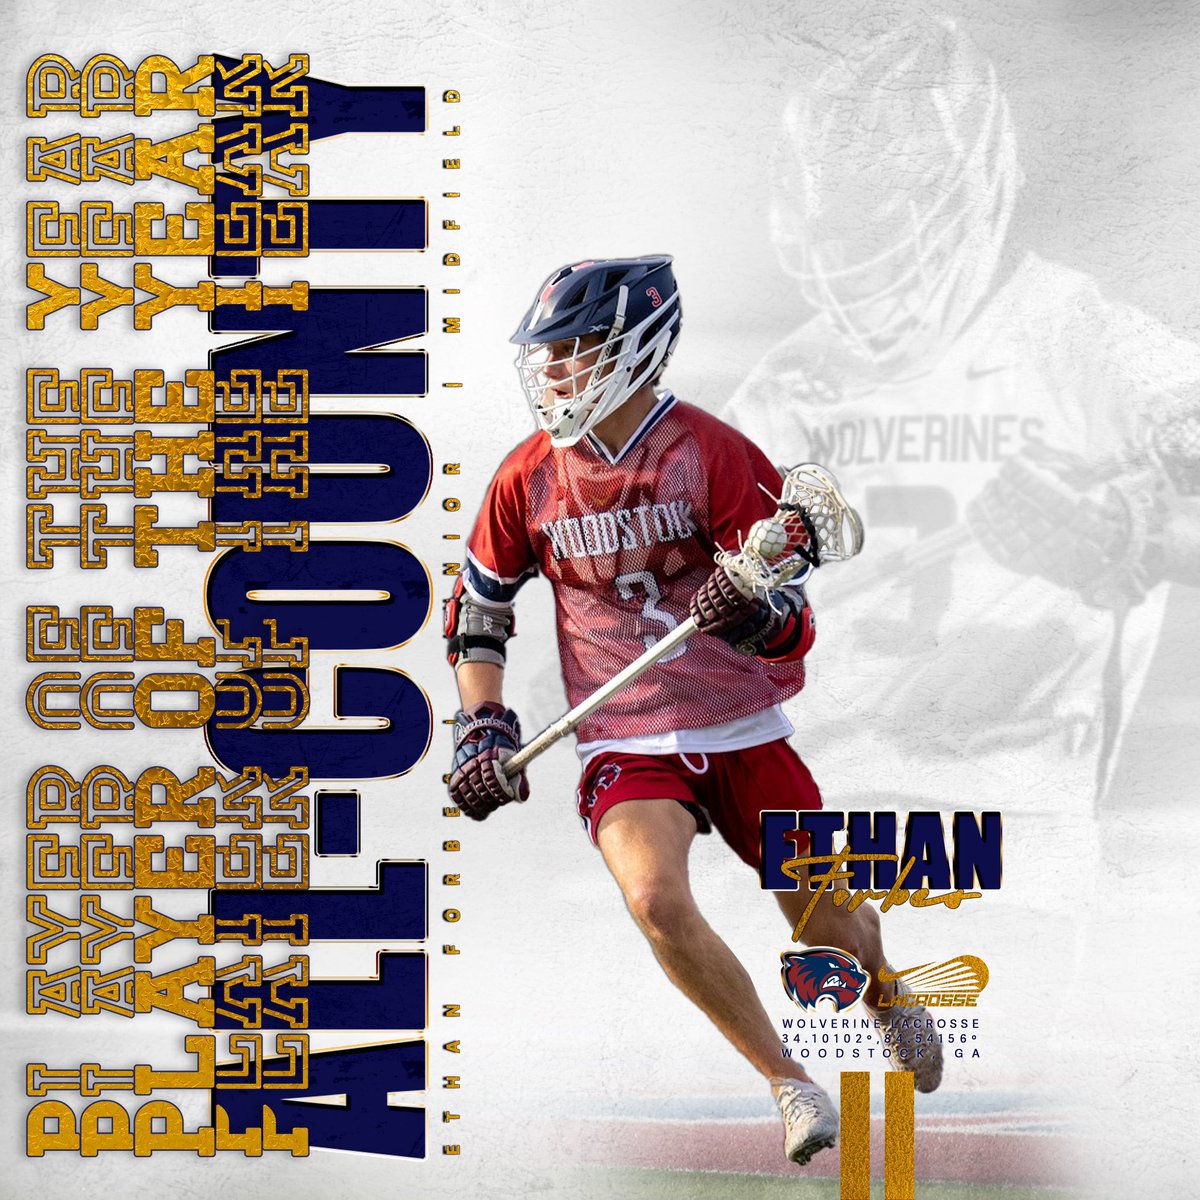 🏆 𝓟𝓛𝓐𝓨𝓔𝓡 𝓞𝓕 𝓣𝓗𝓔 𝓨𝓔𝓐𝓡 🏆 Woodstock Men’s 🥍 would like to thank all the coaches across the county for coming together to name @ethansforbes as PoY. ☝️ Player in the county receives this award and is an exceptional accomplishment in excellence of the sport of 🥍!